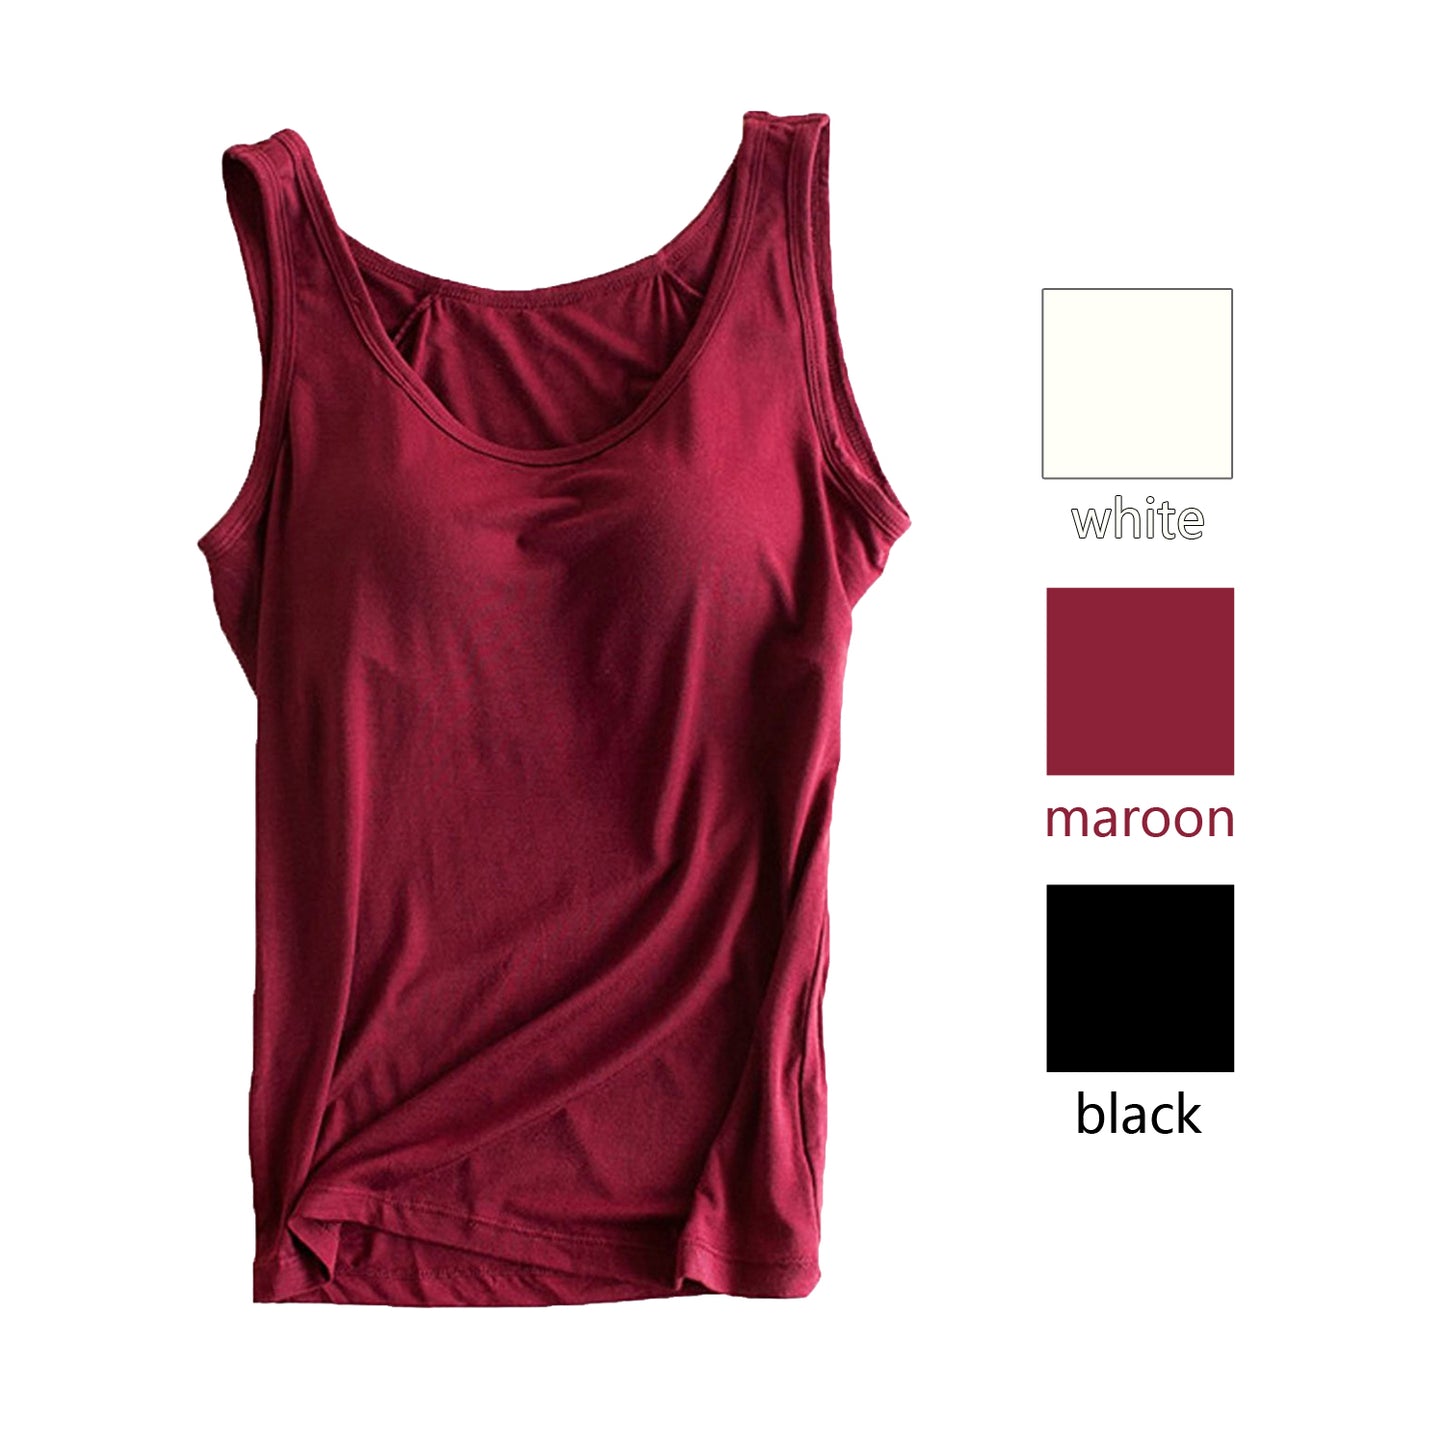 Women Modal Camisole with Built in Shelf Bra Solid Color Vest, Maroon M